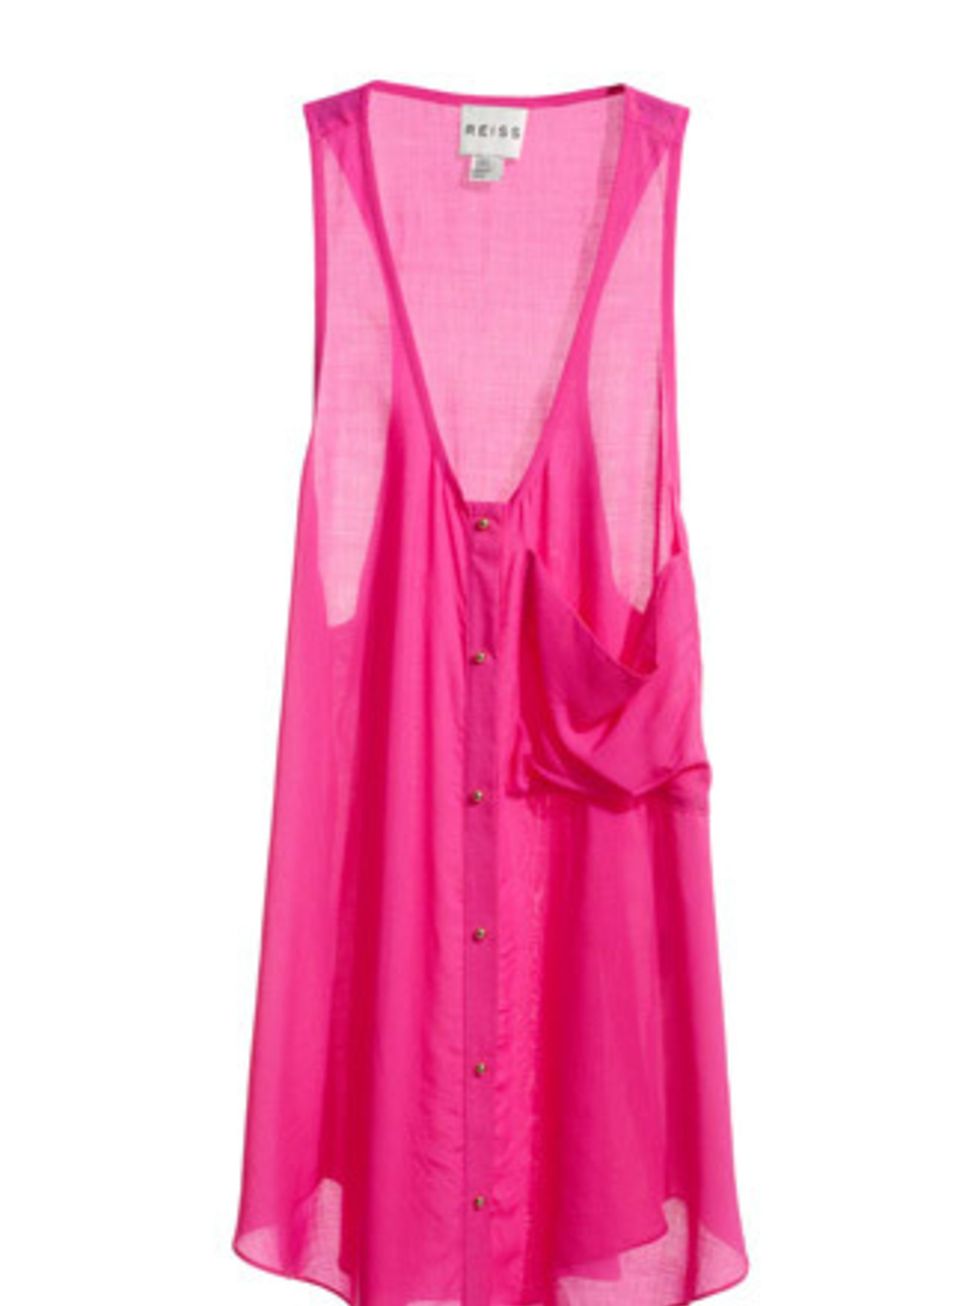 <p>A hot pink vest is perfect for lazy days by the sea or chilling at a festival. It will also look great under a thick grey cardigan and jeans come autumn too.</p><p>Vest, £85 by <a href="http://www.reiss.co.uk/shop/womens/womens_new_arrivals/jasmin/elec